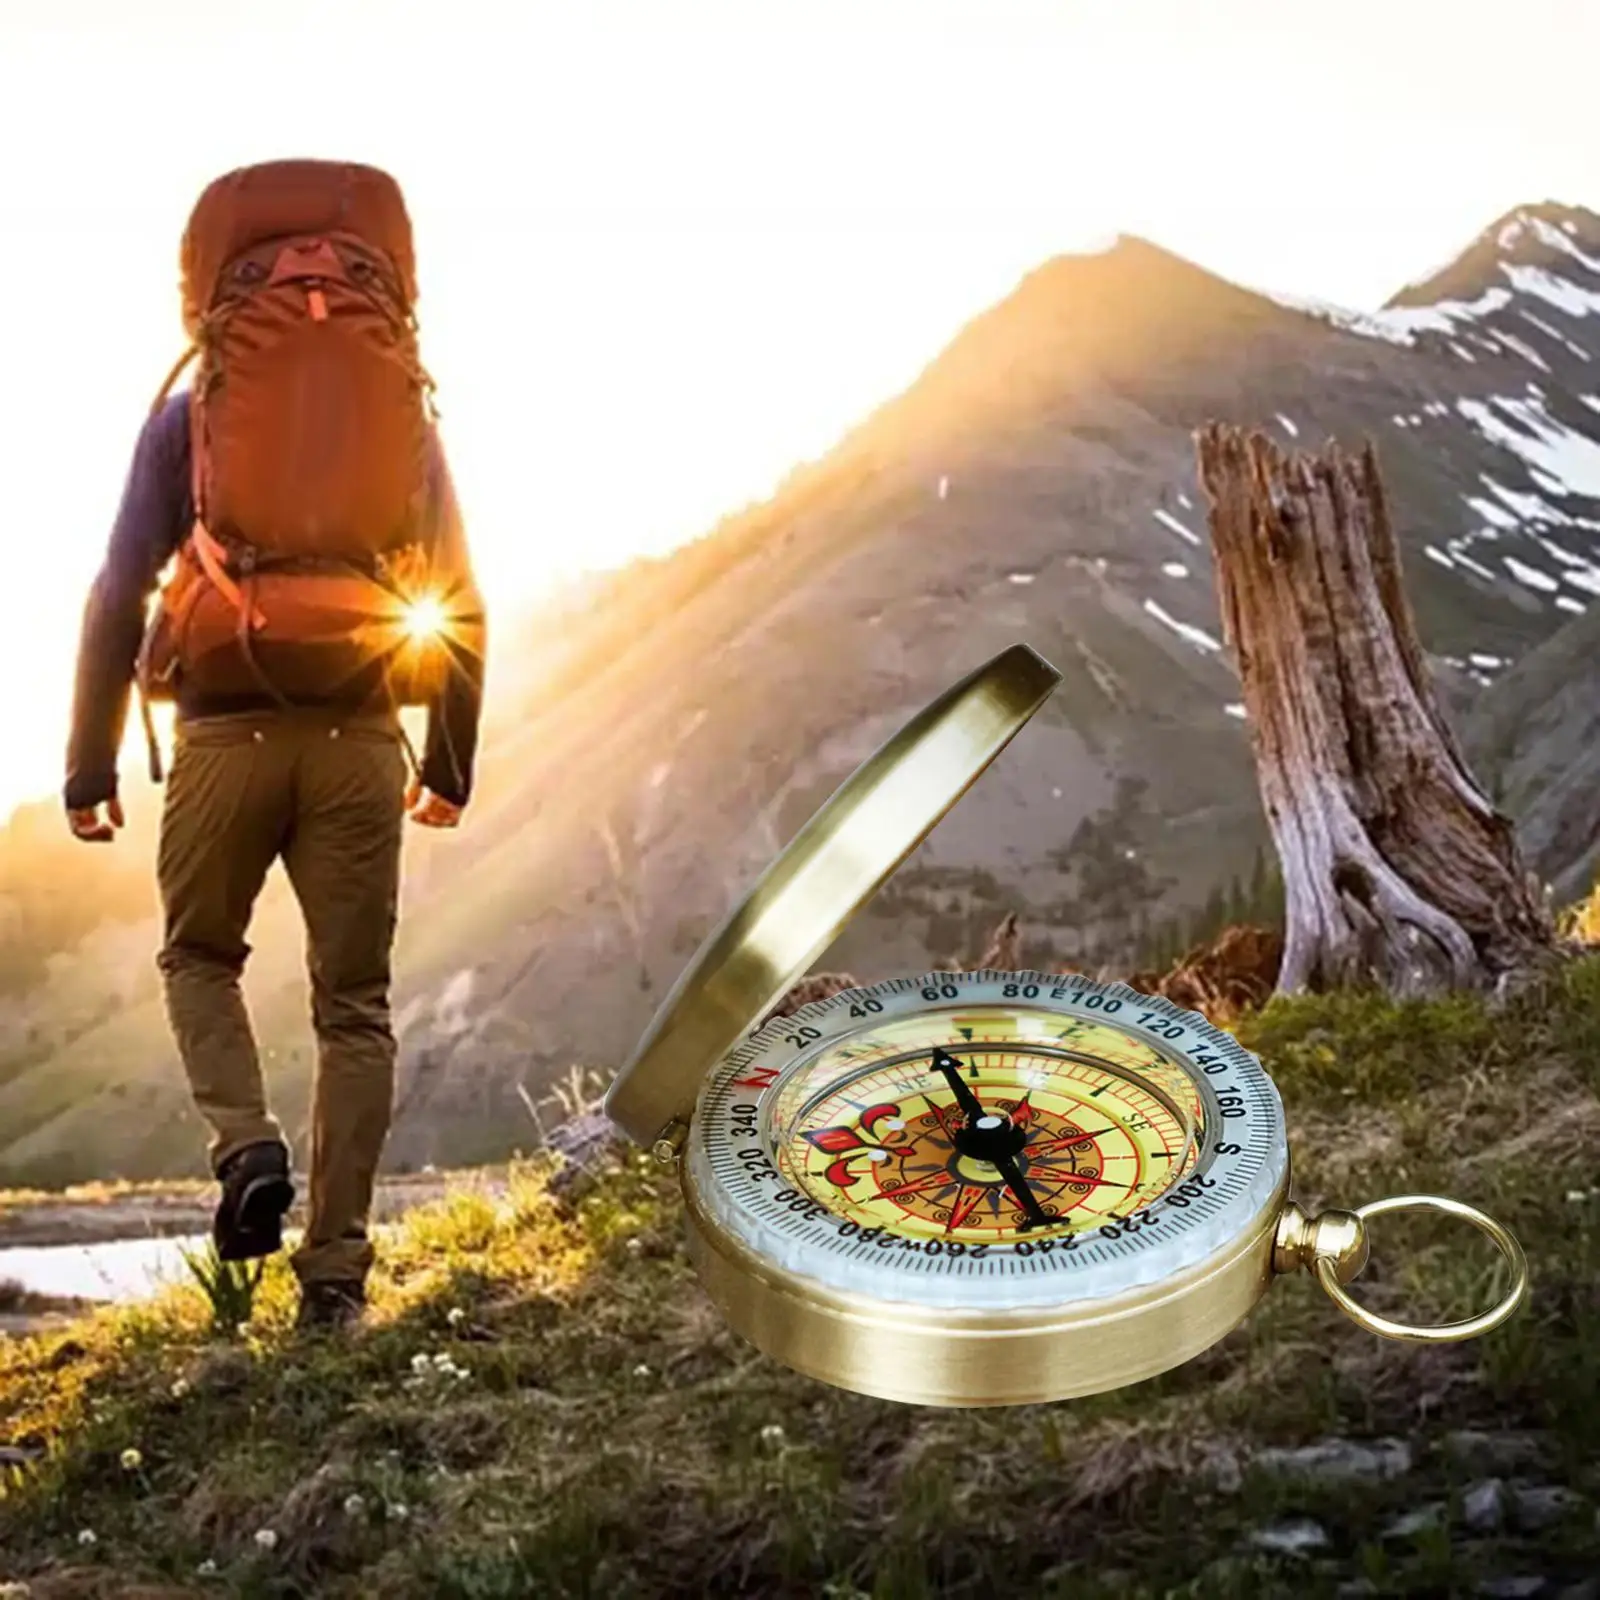 Camping Survival Compass Waterproof Pocket Compass Glow in The Dark Hiking